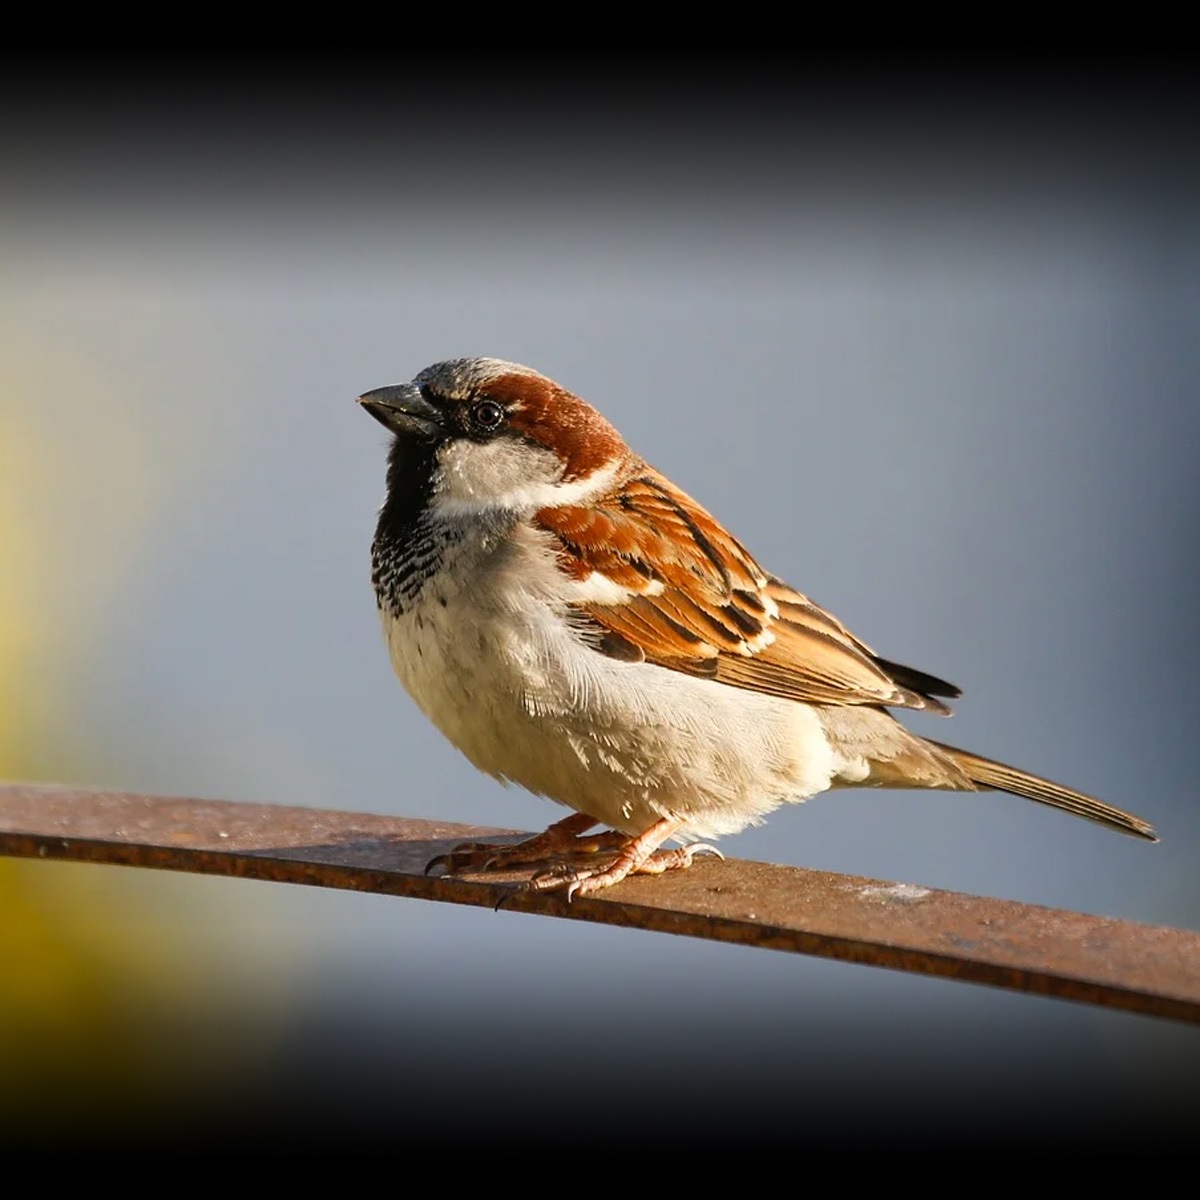 WORLD SPARROW DAY IN TAMIL